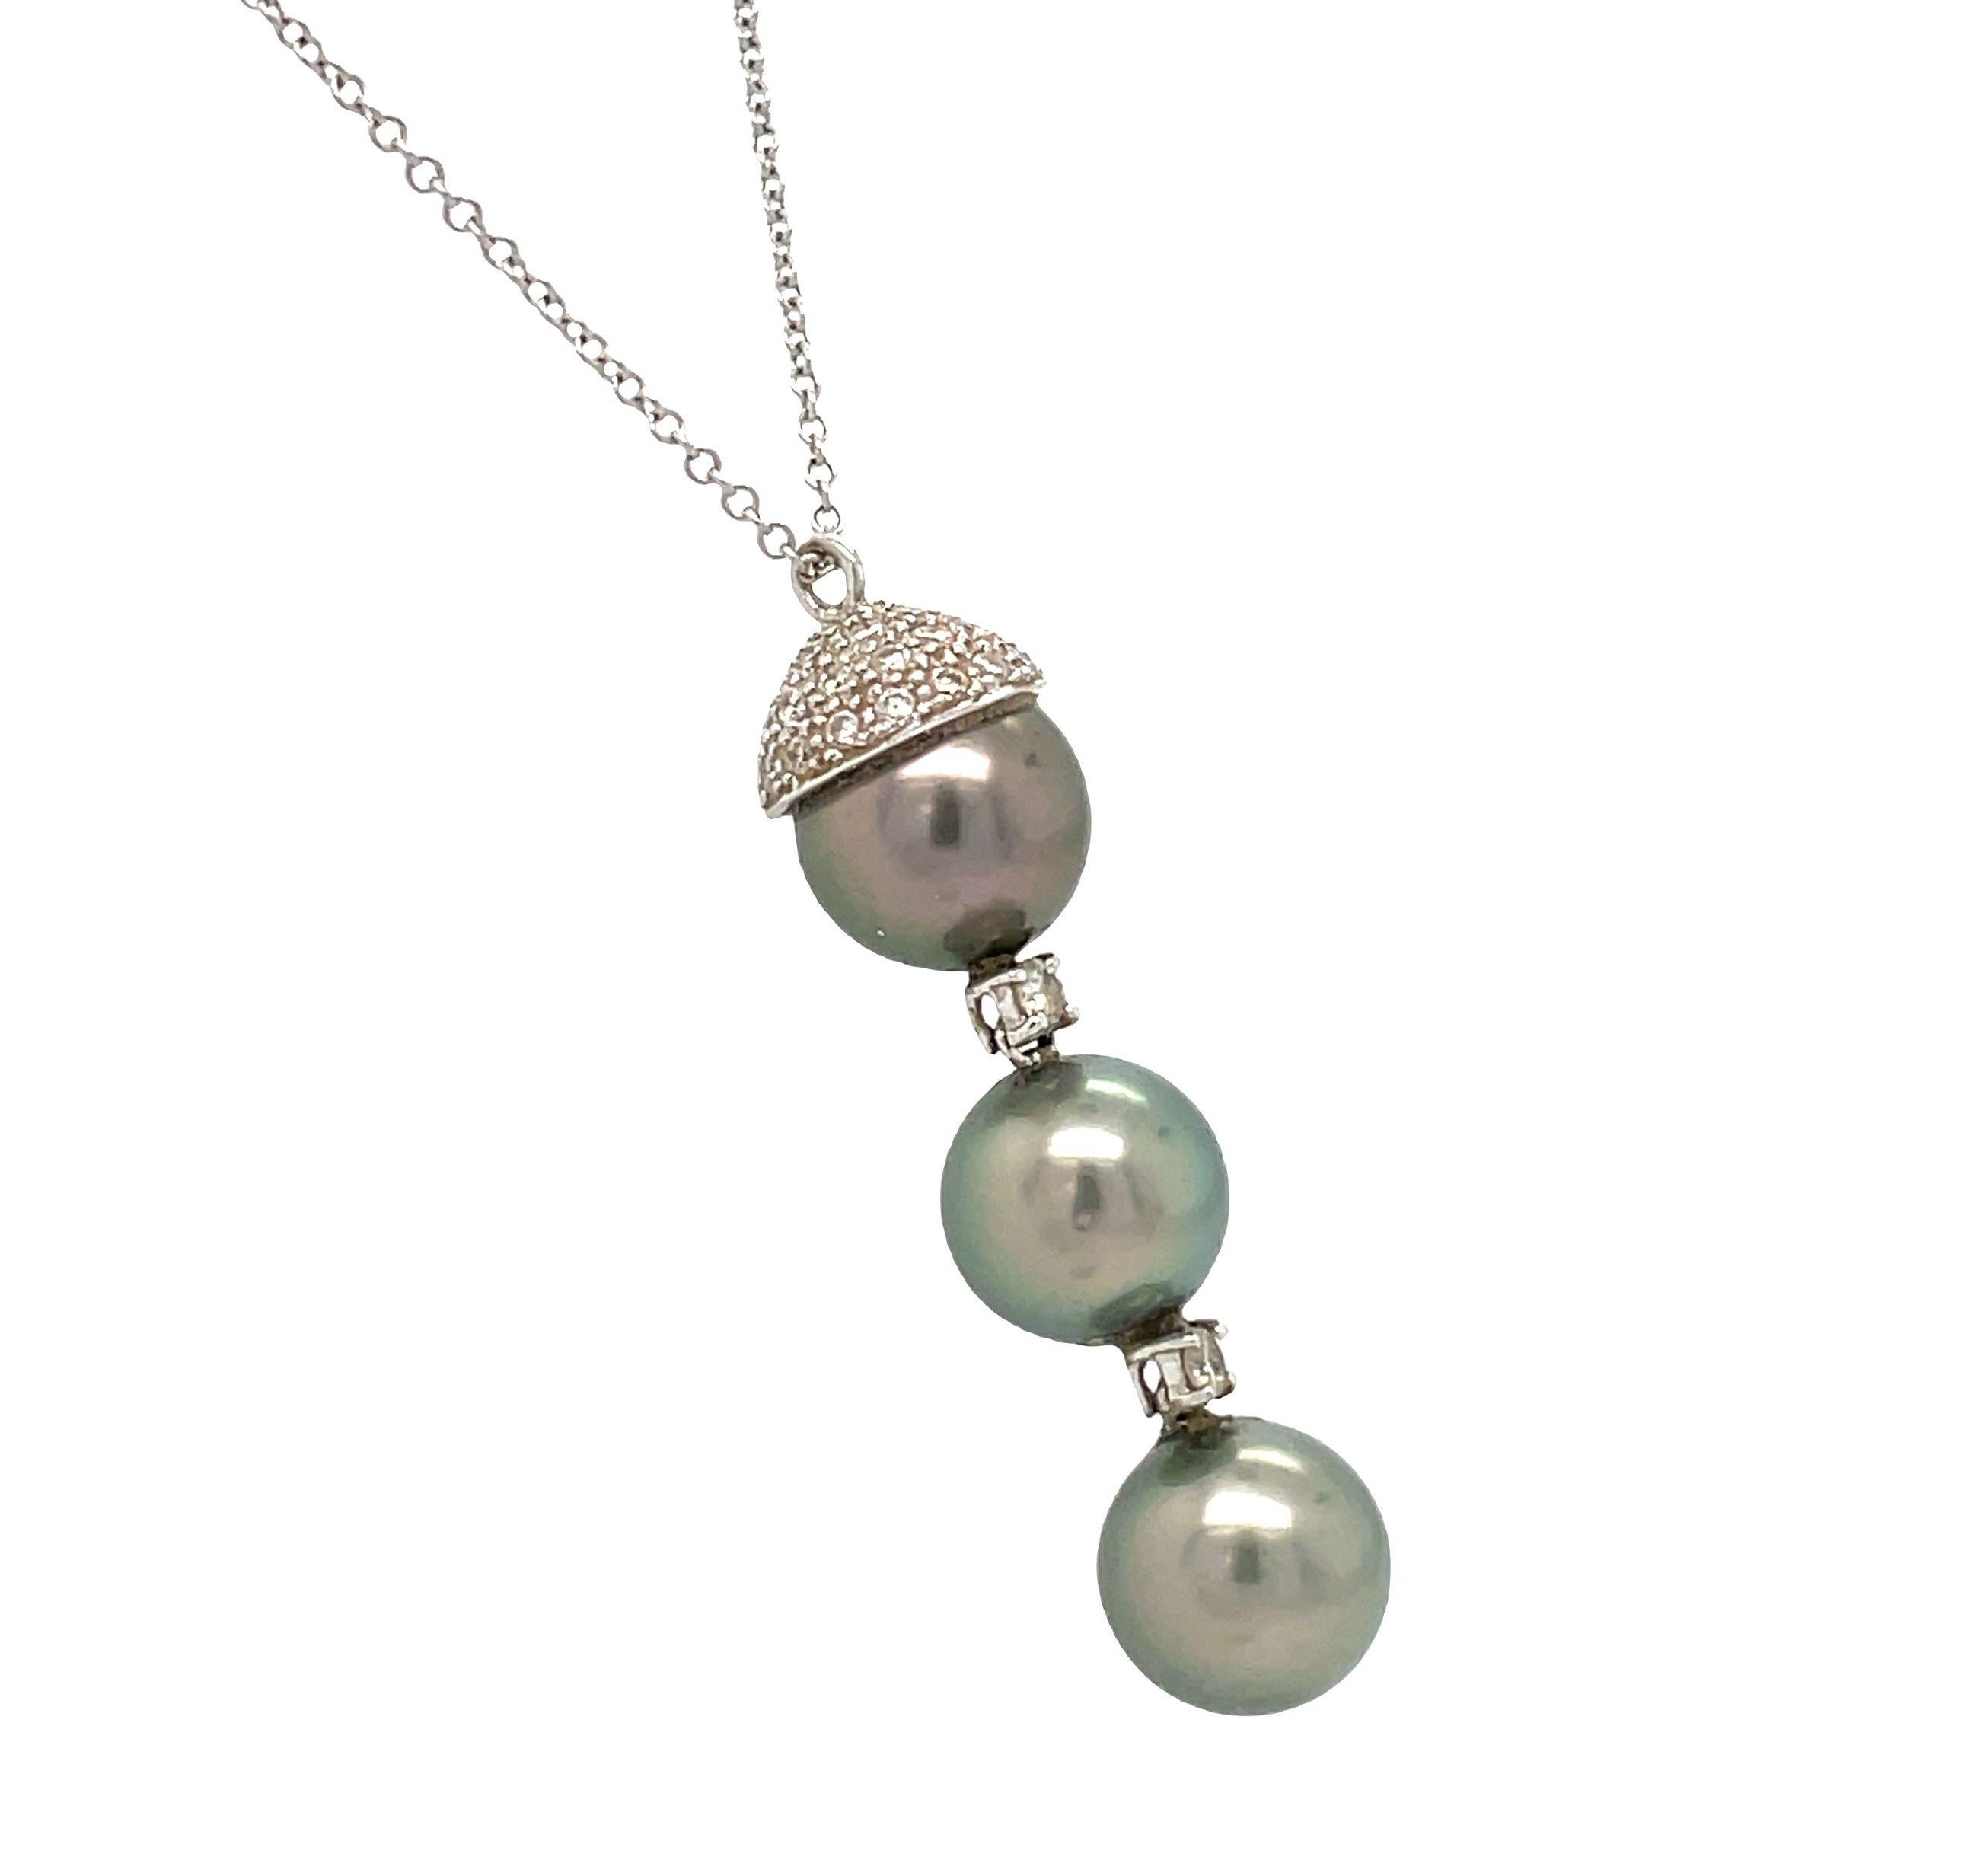 This exquisite 14K white gold necklace, adorned with black cultured Akoya pearls and diamonds, showcases a wonderful dangle style, with round brilliant cut diamonds elegantly suspended alongside beautiful freely dangling pearls.

The pendant